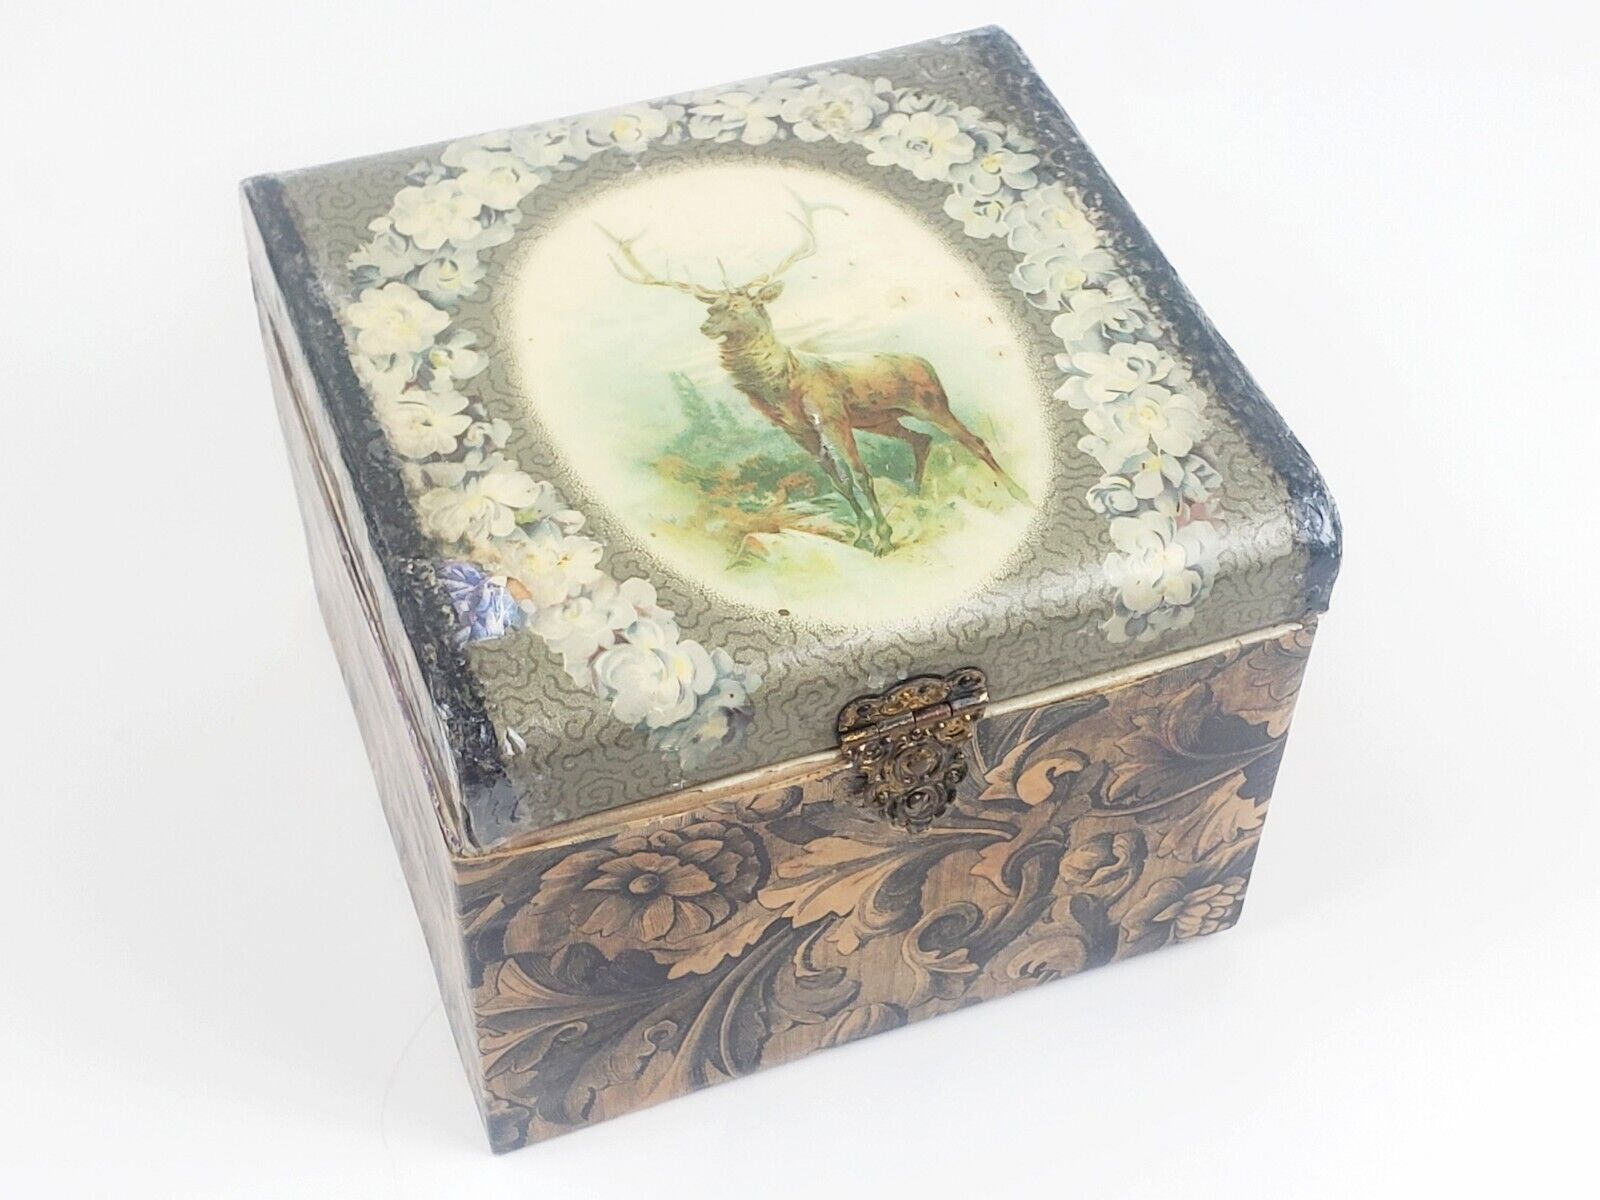 Antique Victorian Celluloid Collar Box with Stag/Deer-Dresser Box Vanity